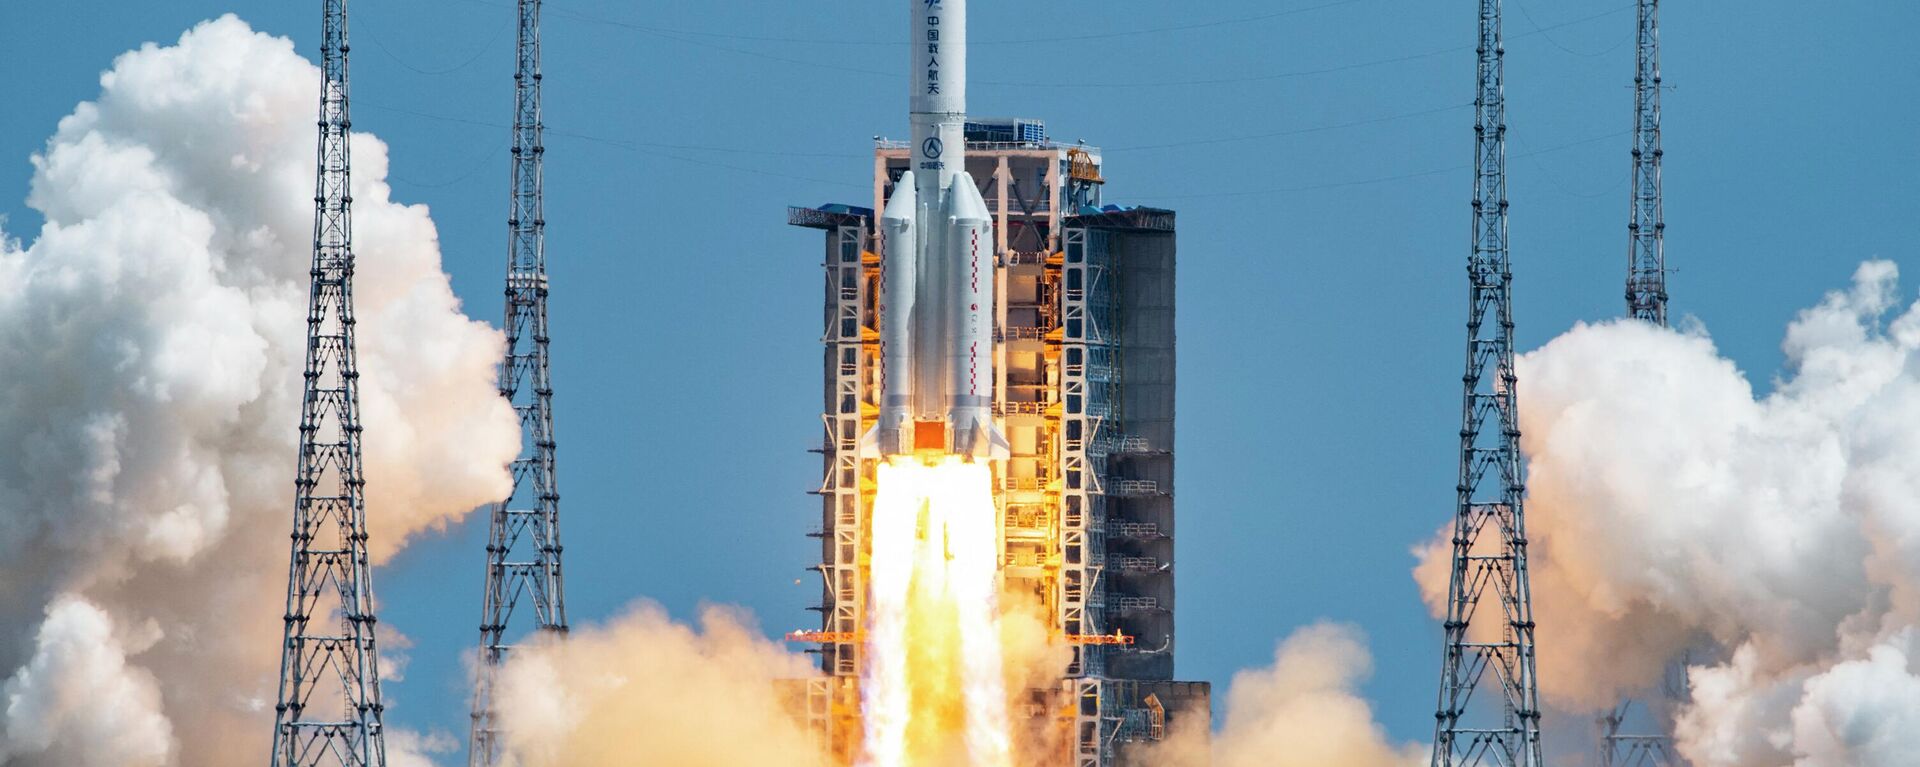 The rocket carrying China’s second module for its Tiangong space station lifts off from Wenchang spaceport in southern China on July 24, 2022. - Sputnik International, 1920, 25.07.2022